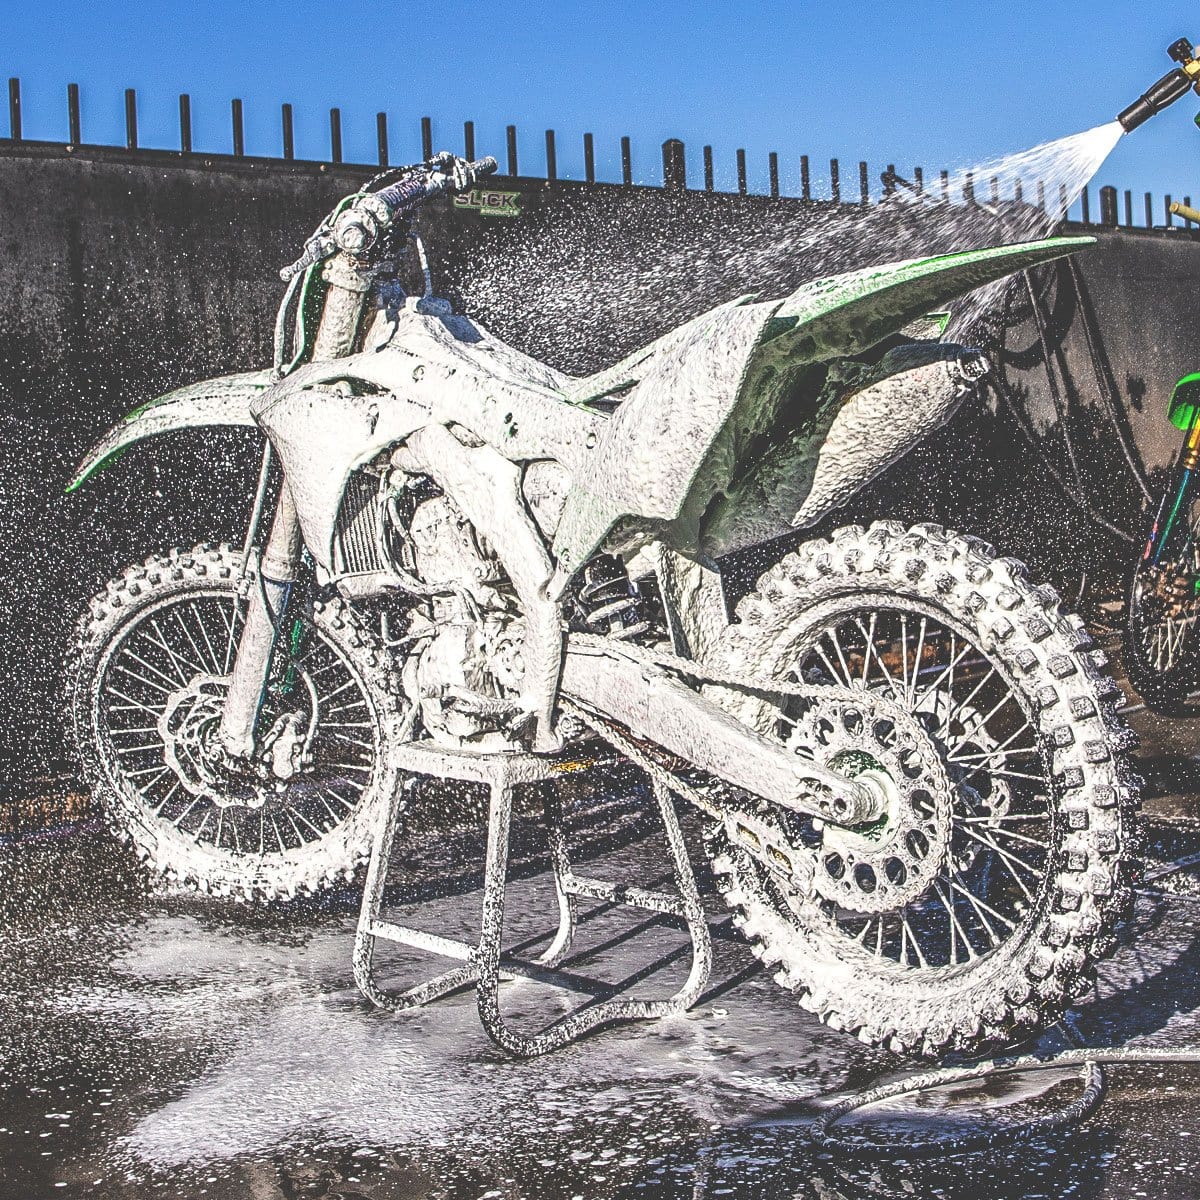 Slick Products - Grab yourself a Dirt Bike Cleaning Kit.